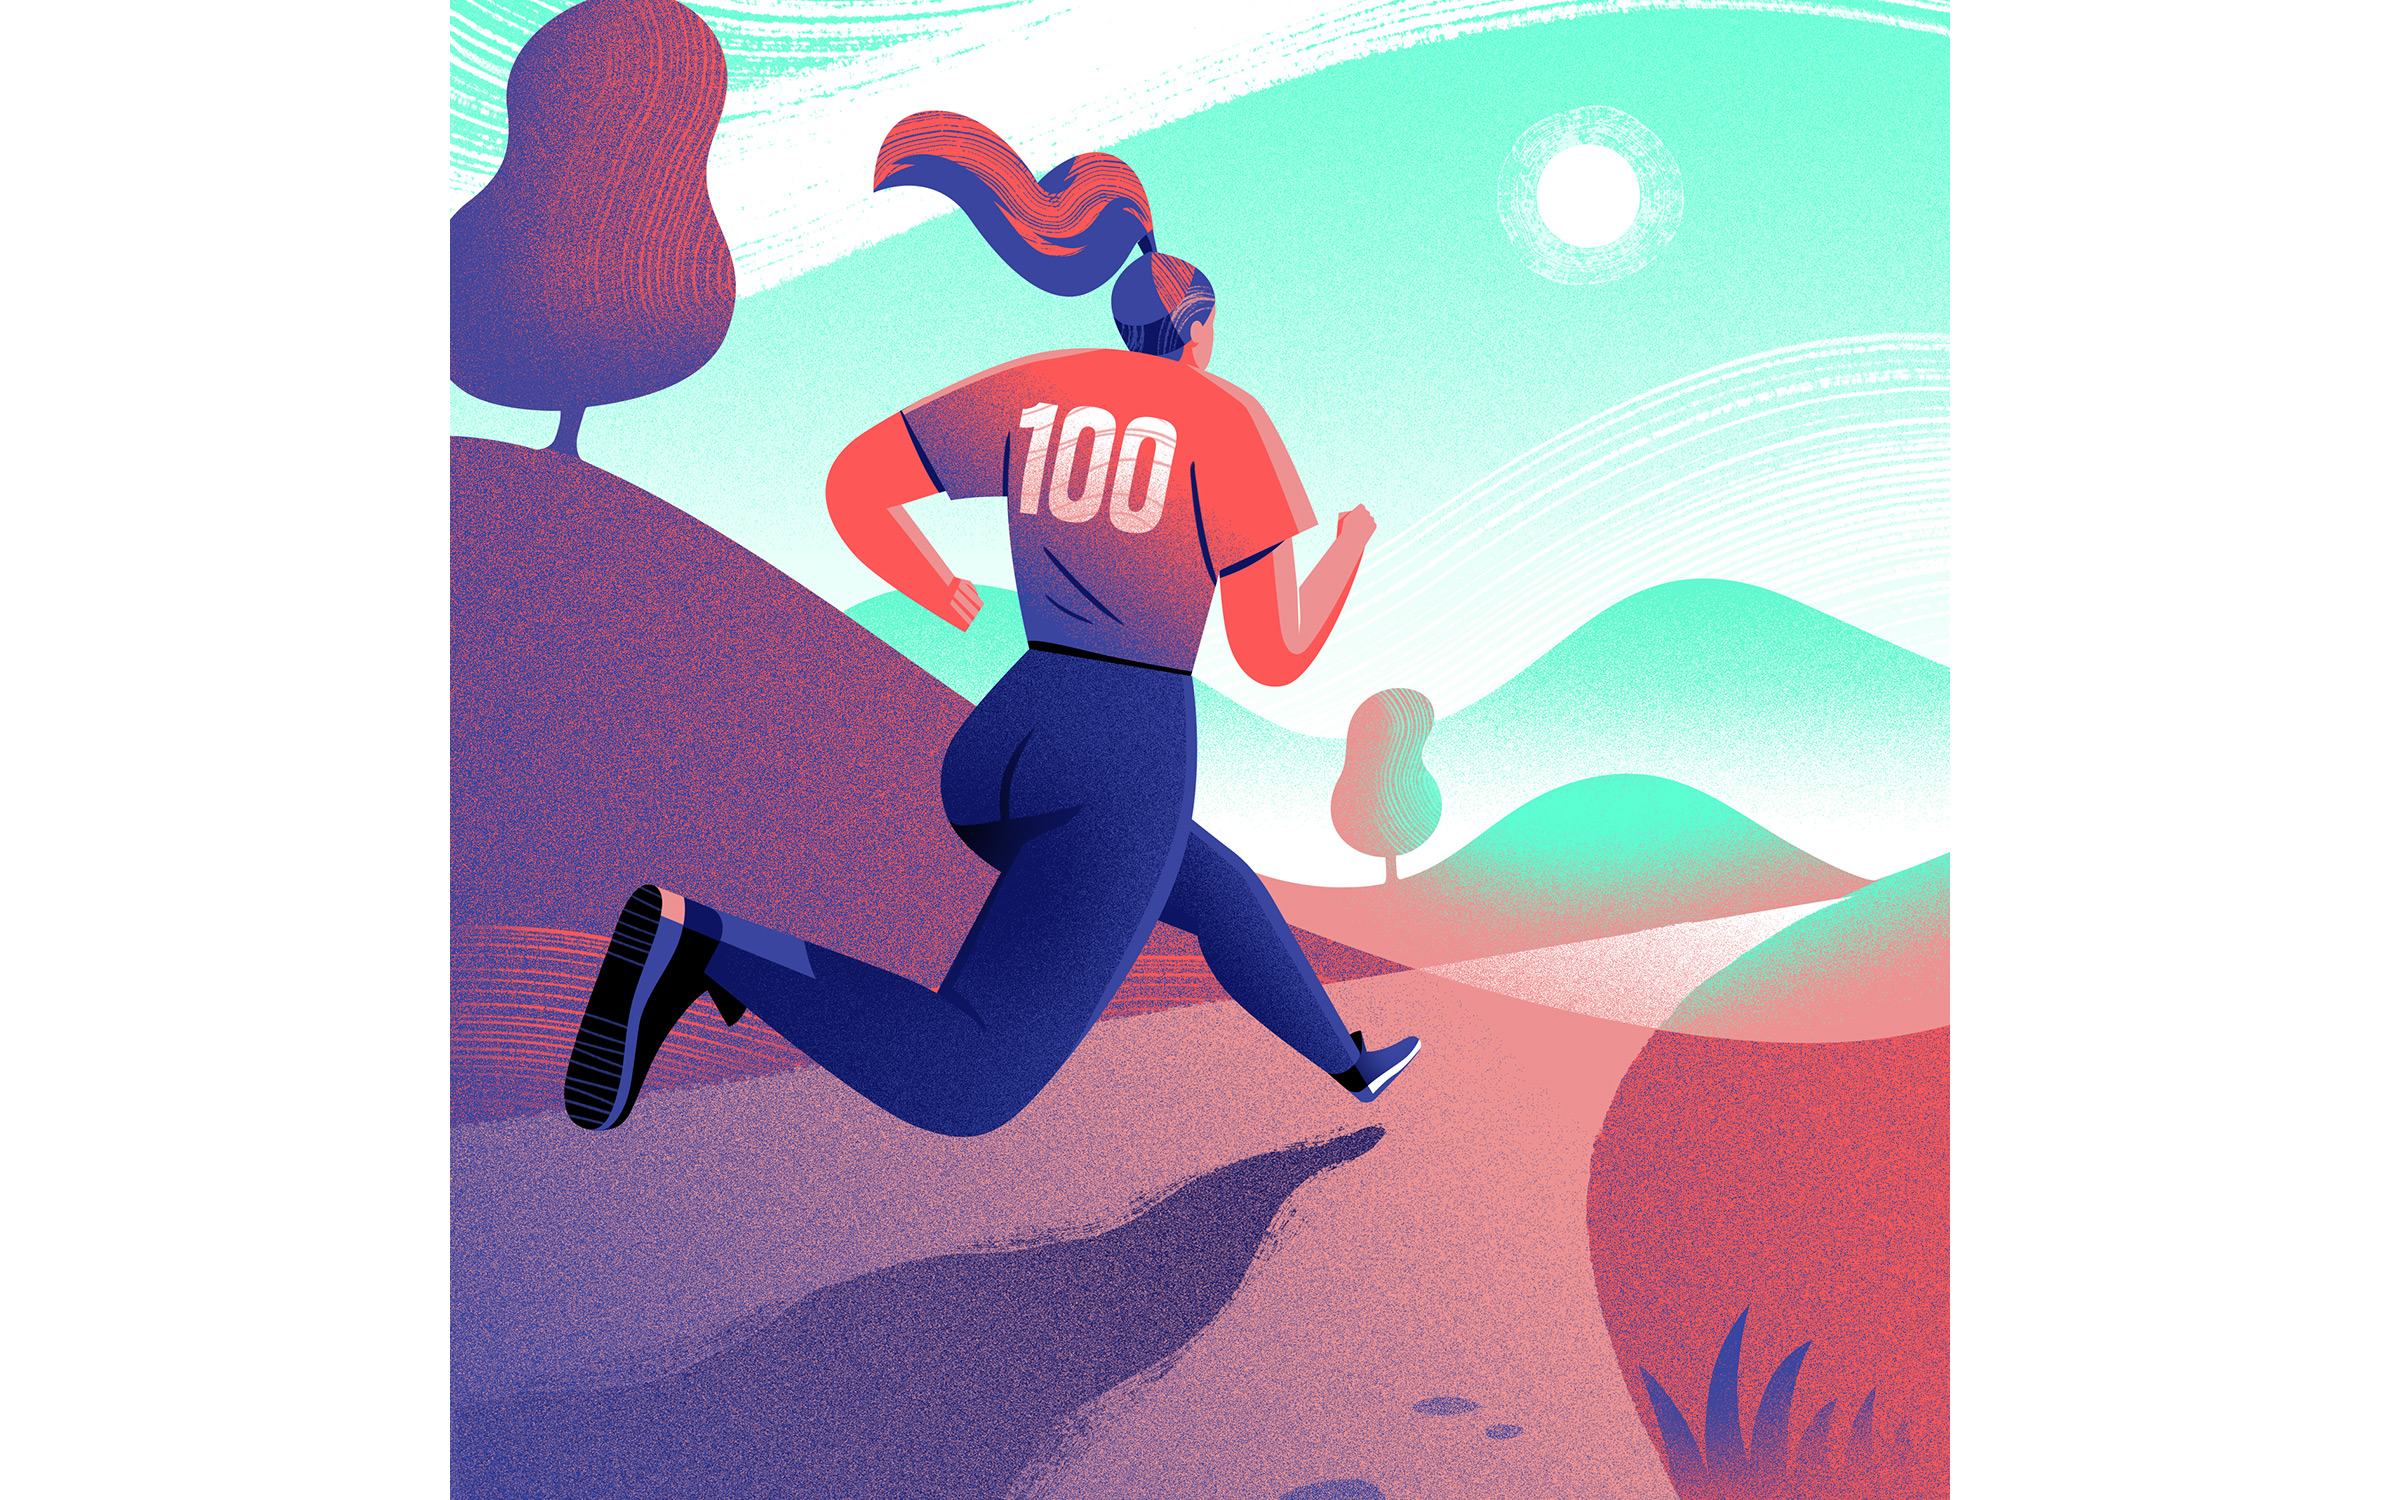 Illustration about running and Park Run